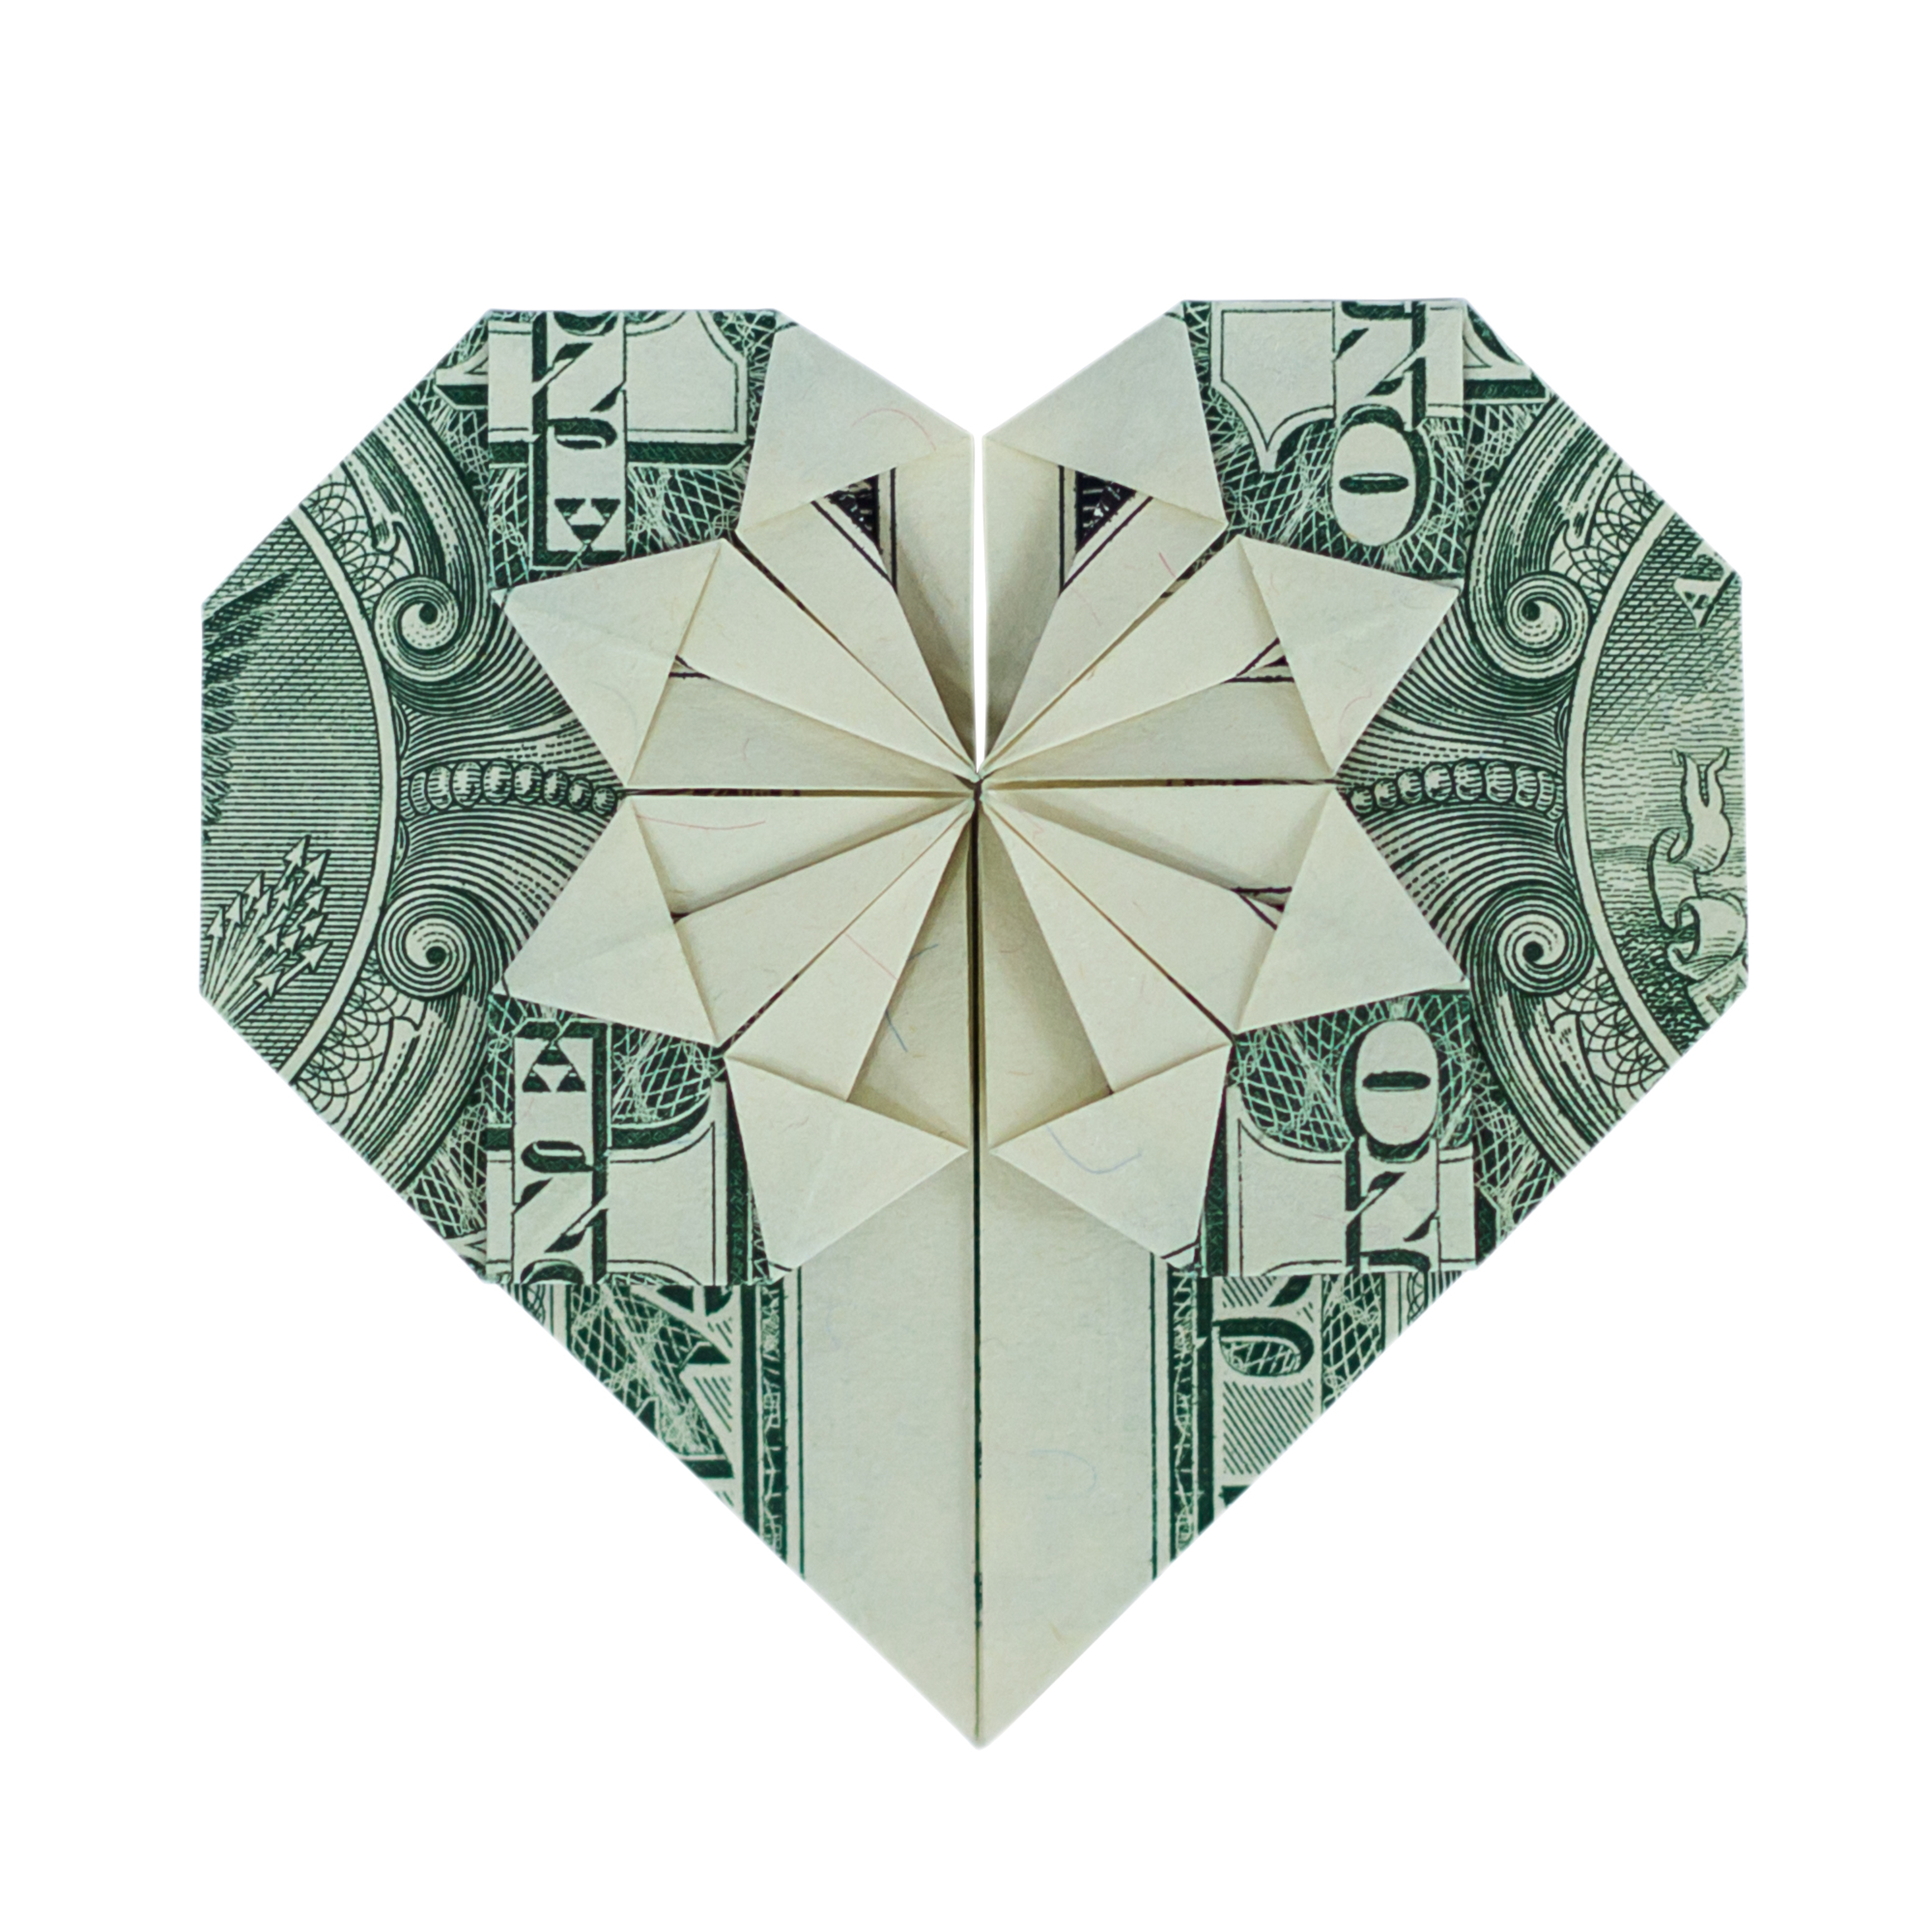 Money Origami Steps Origami Heart Ideas And How To The Dating Divas